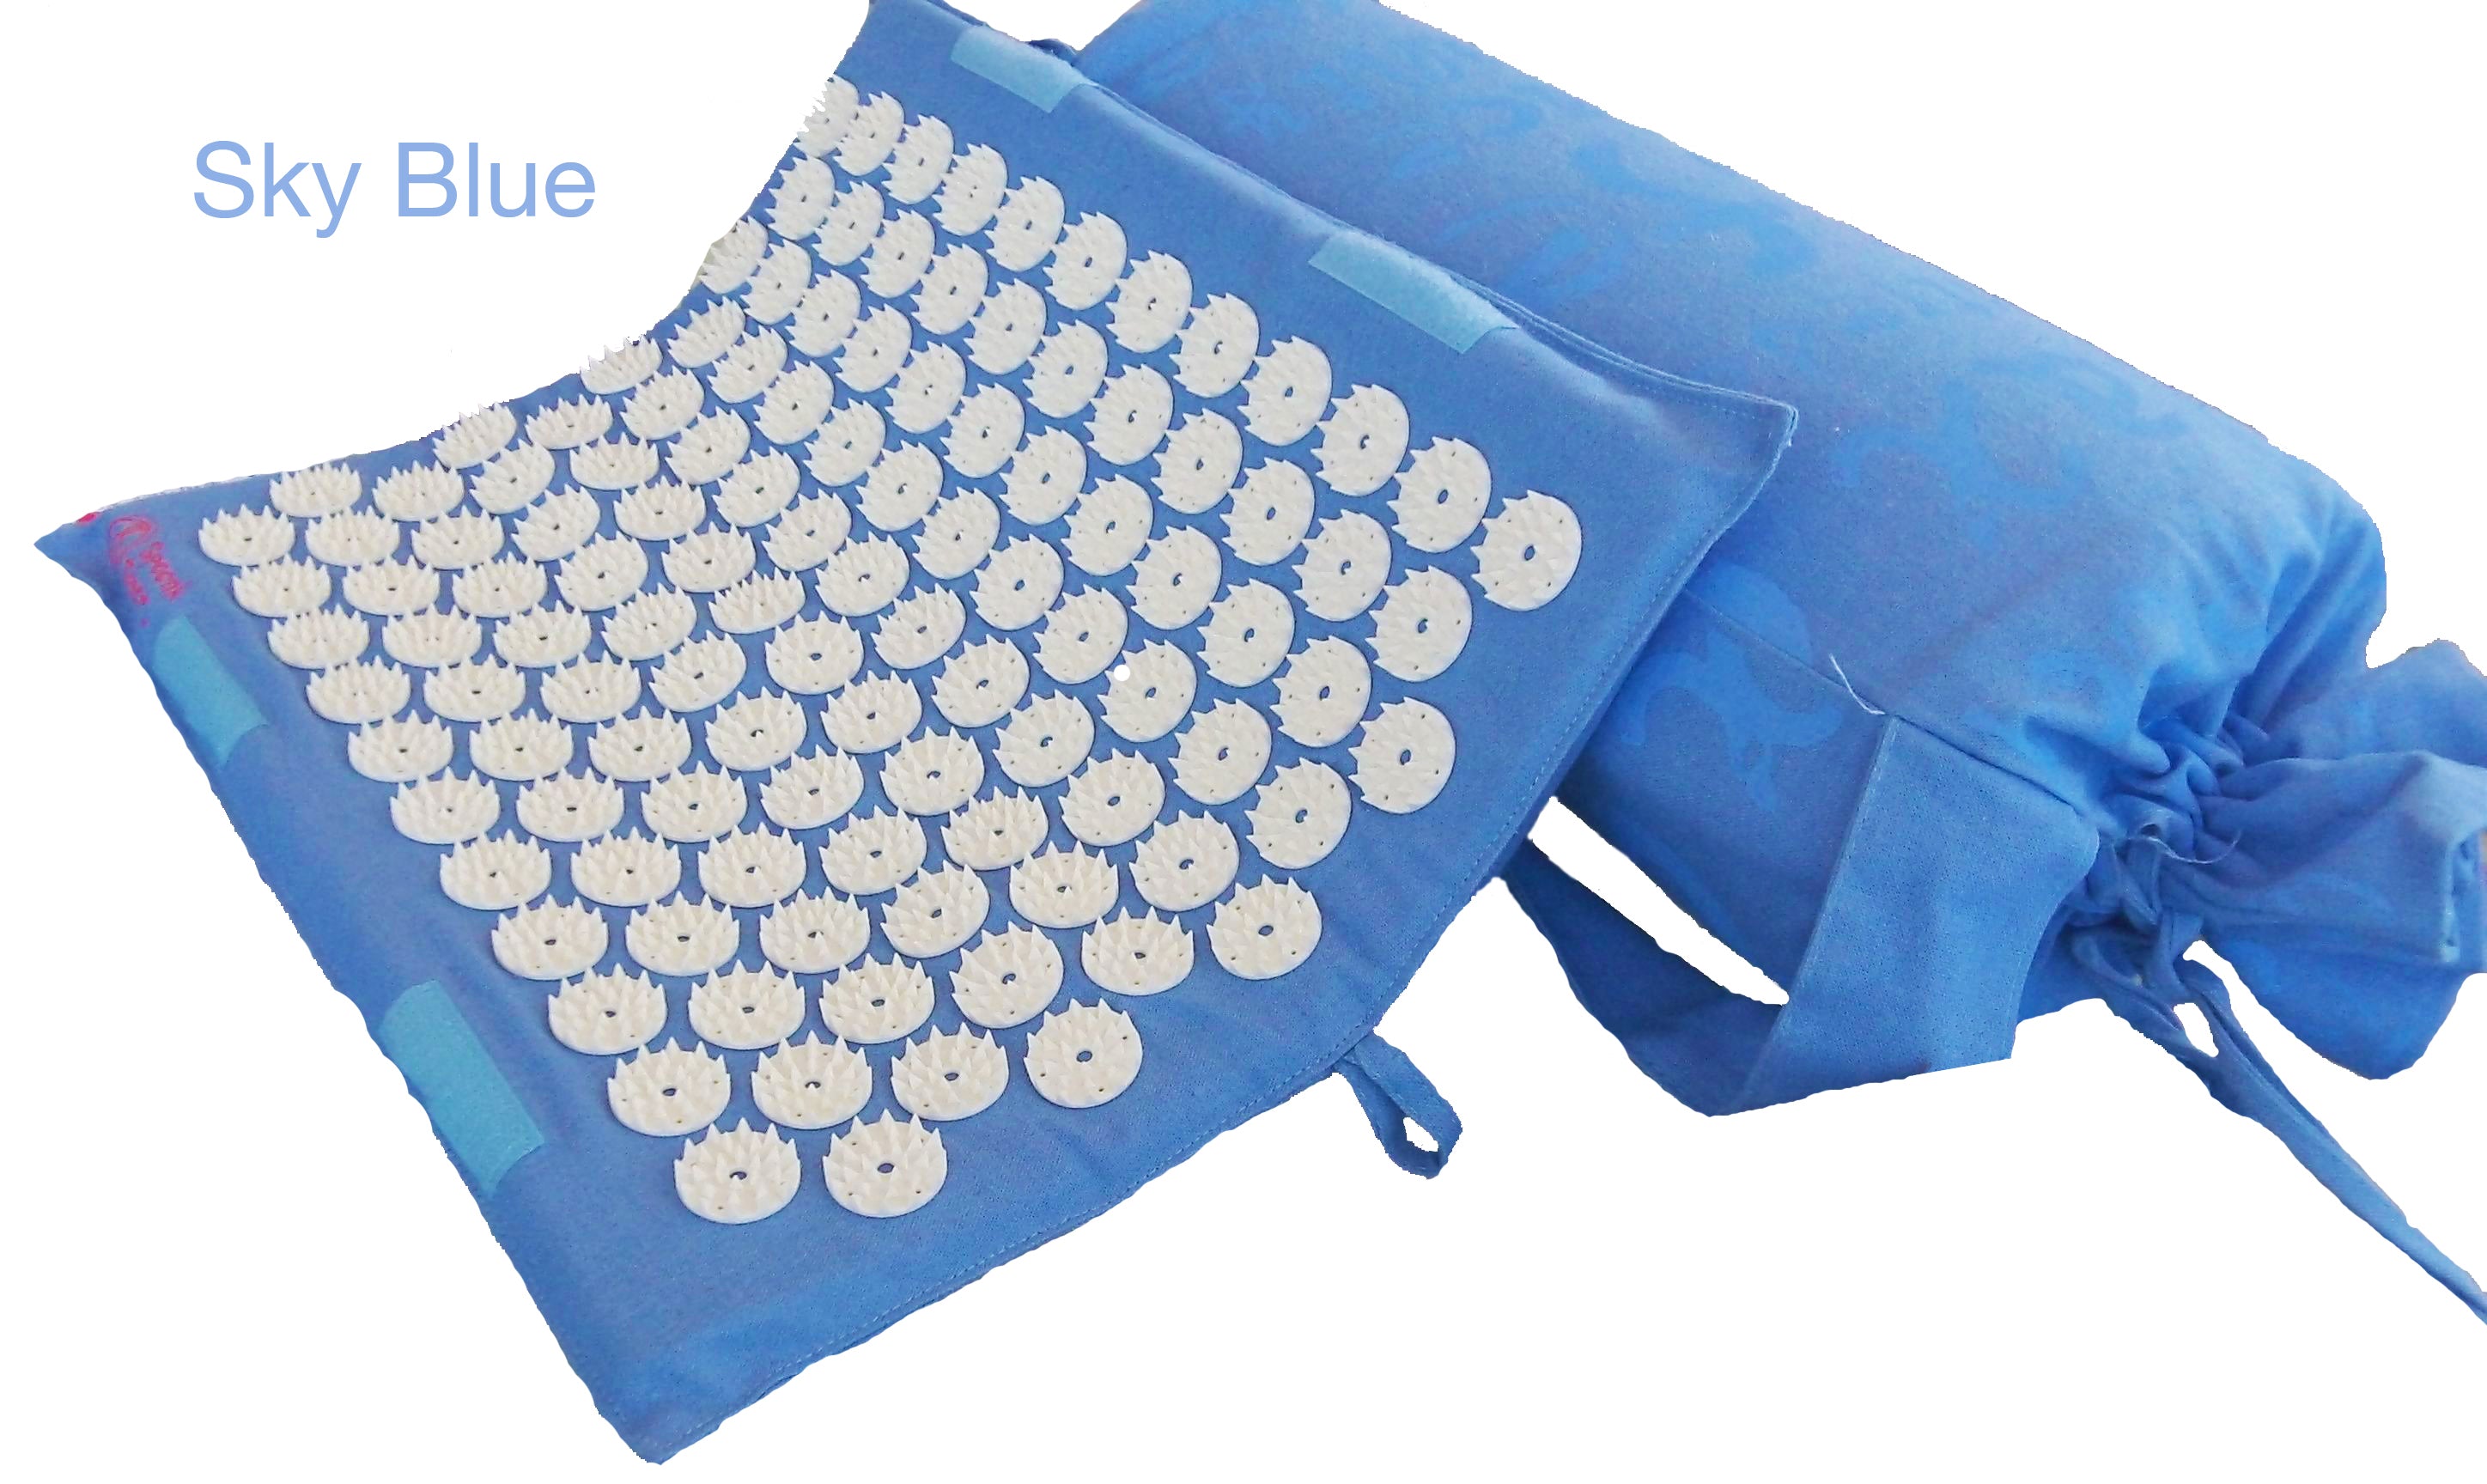 Acupressure Massage Mats Provide Natural Pain Relief